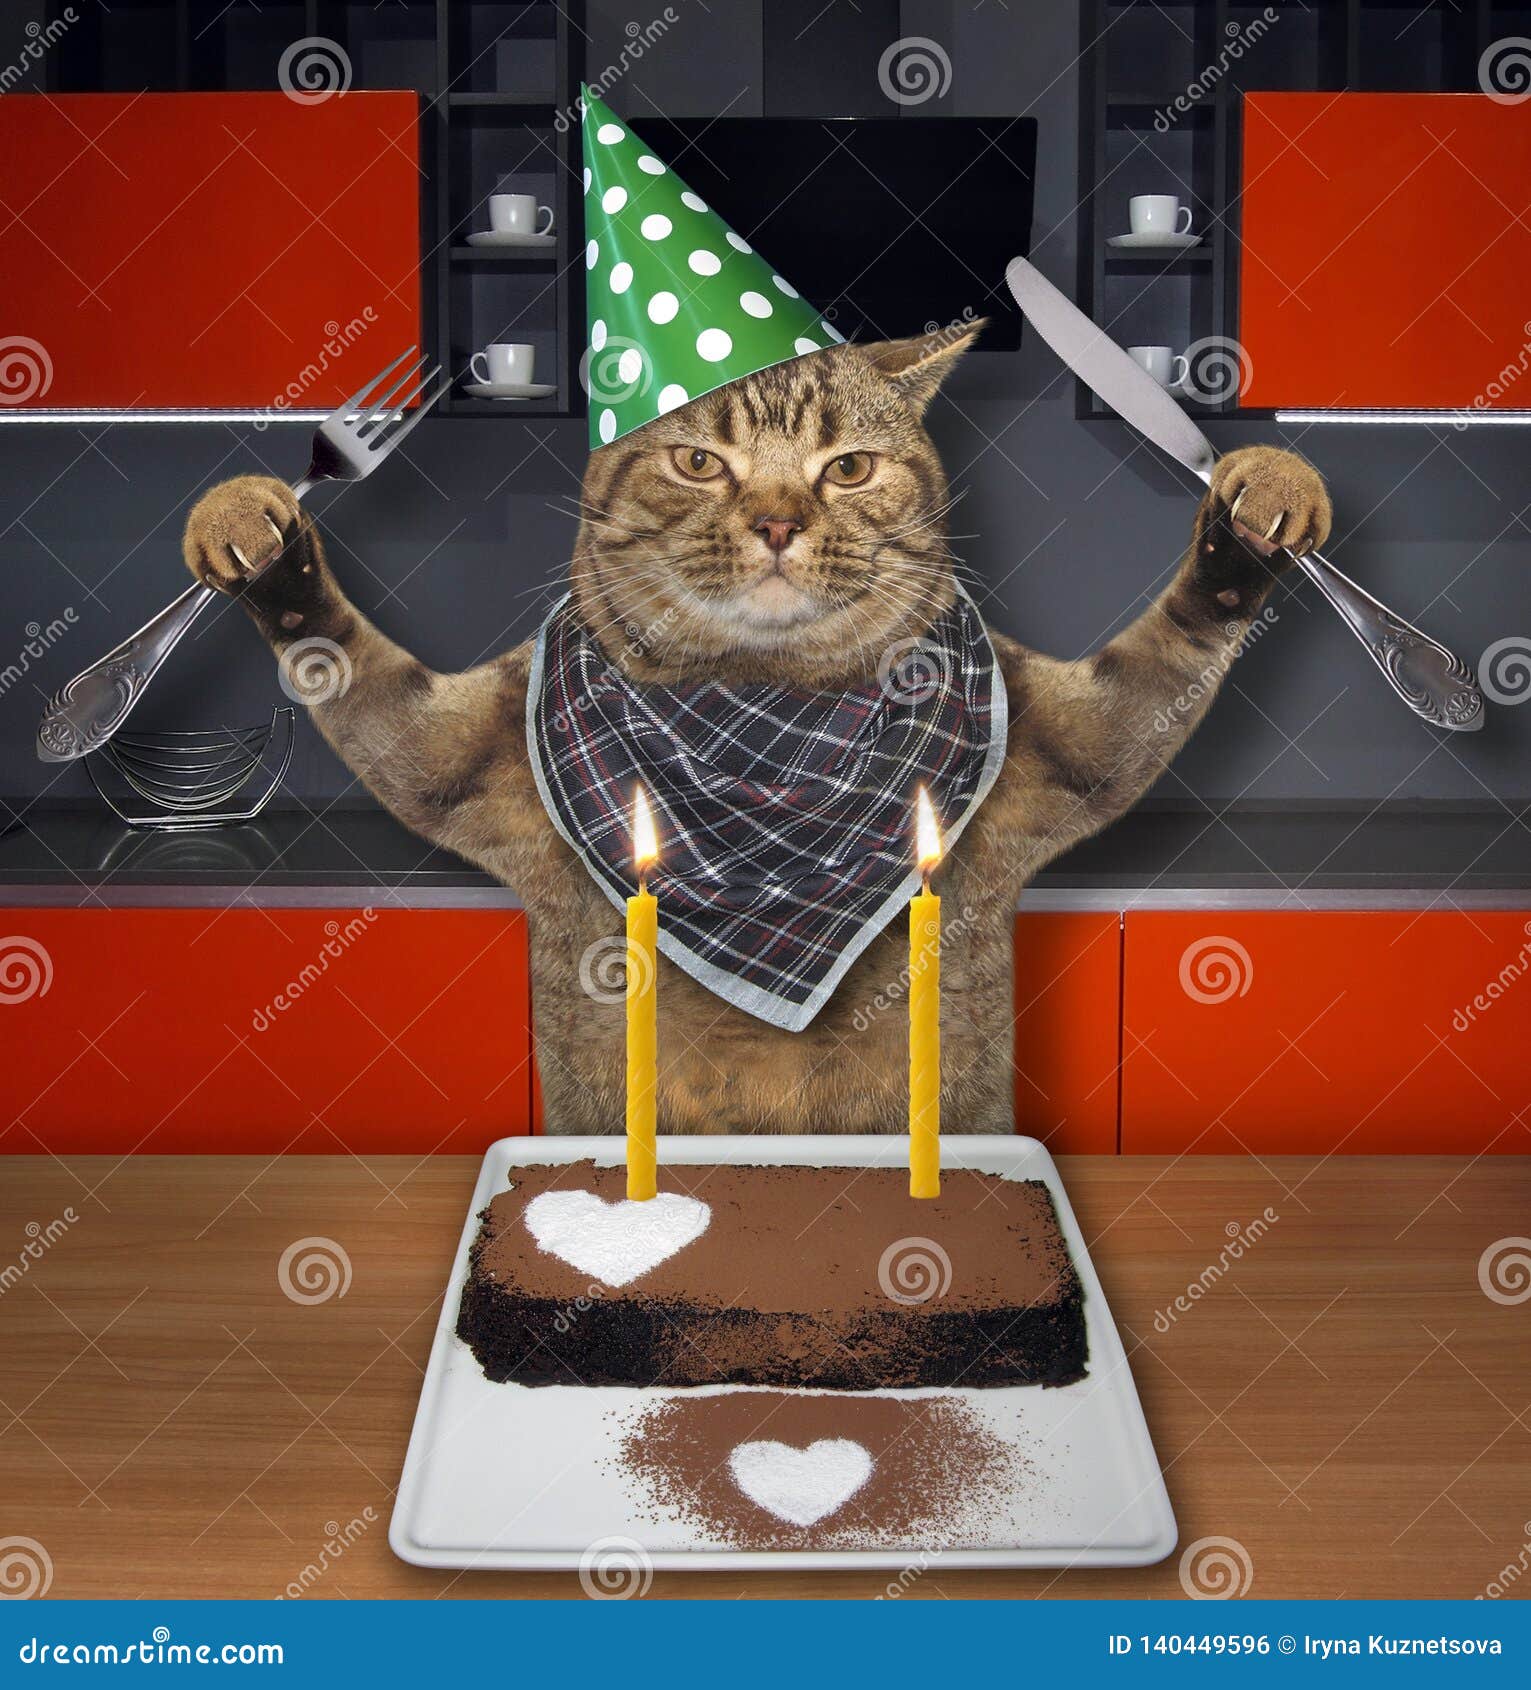 Cat Eating A Chocolate Cake With Candles Stock Photo Image of humor